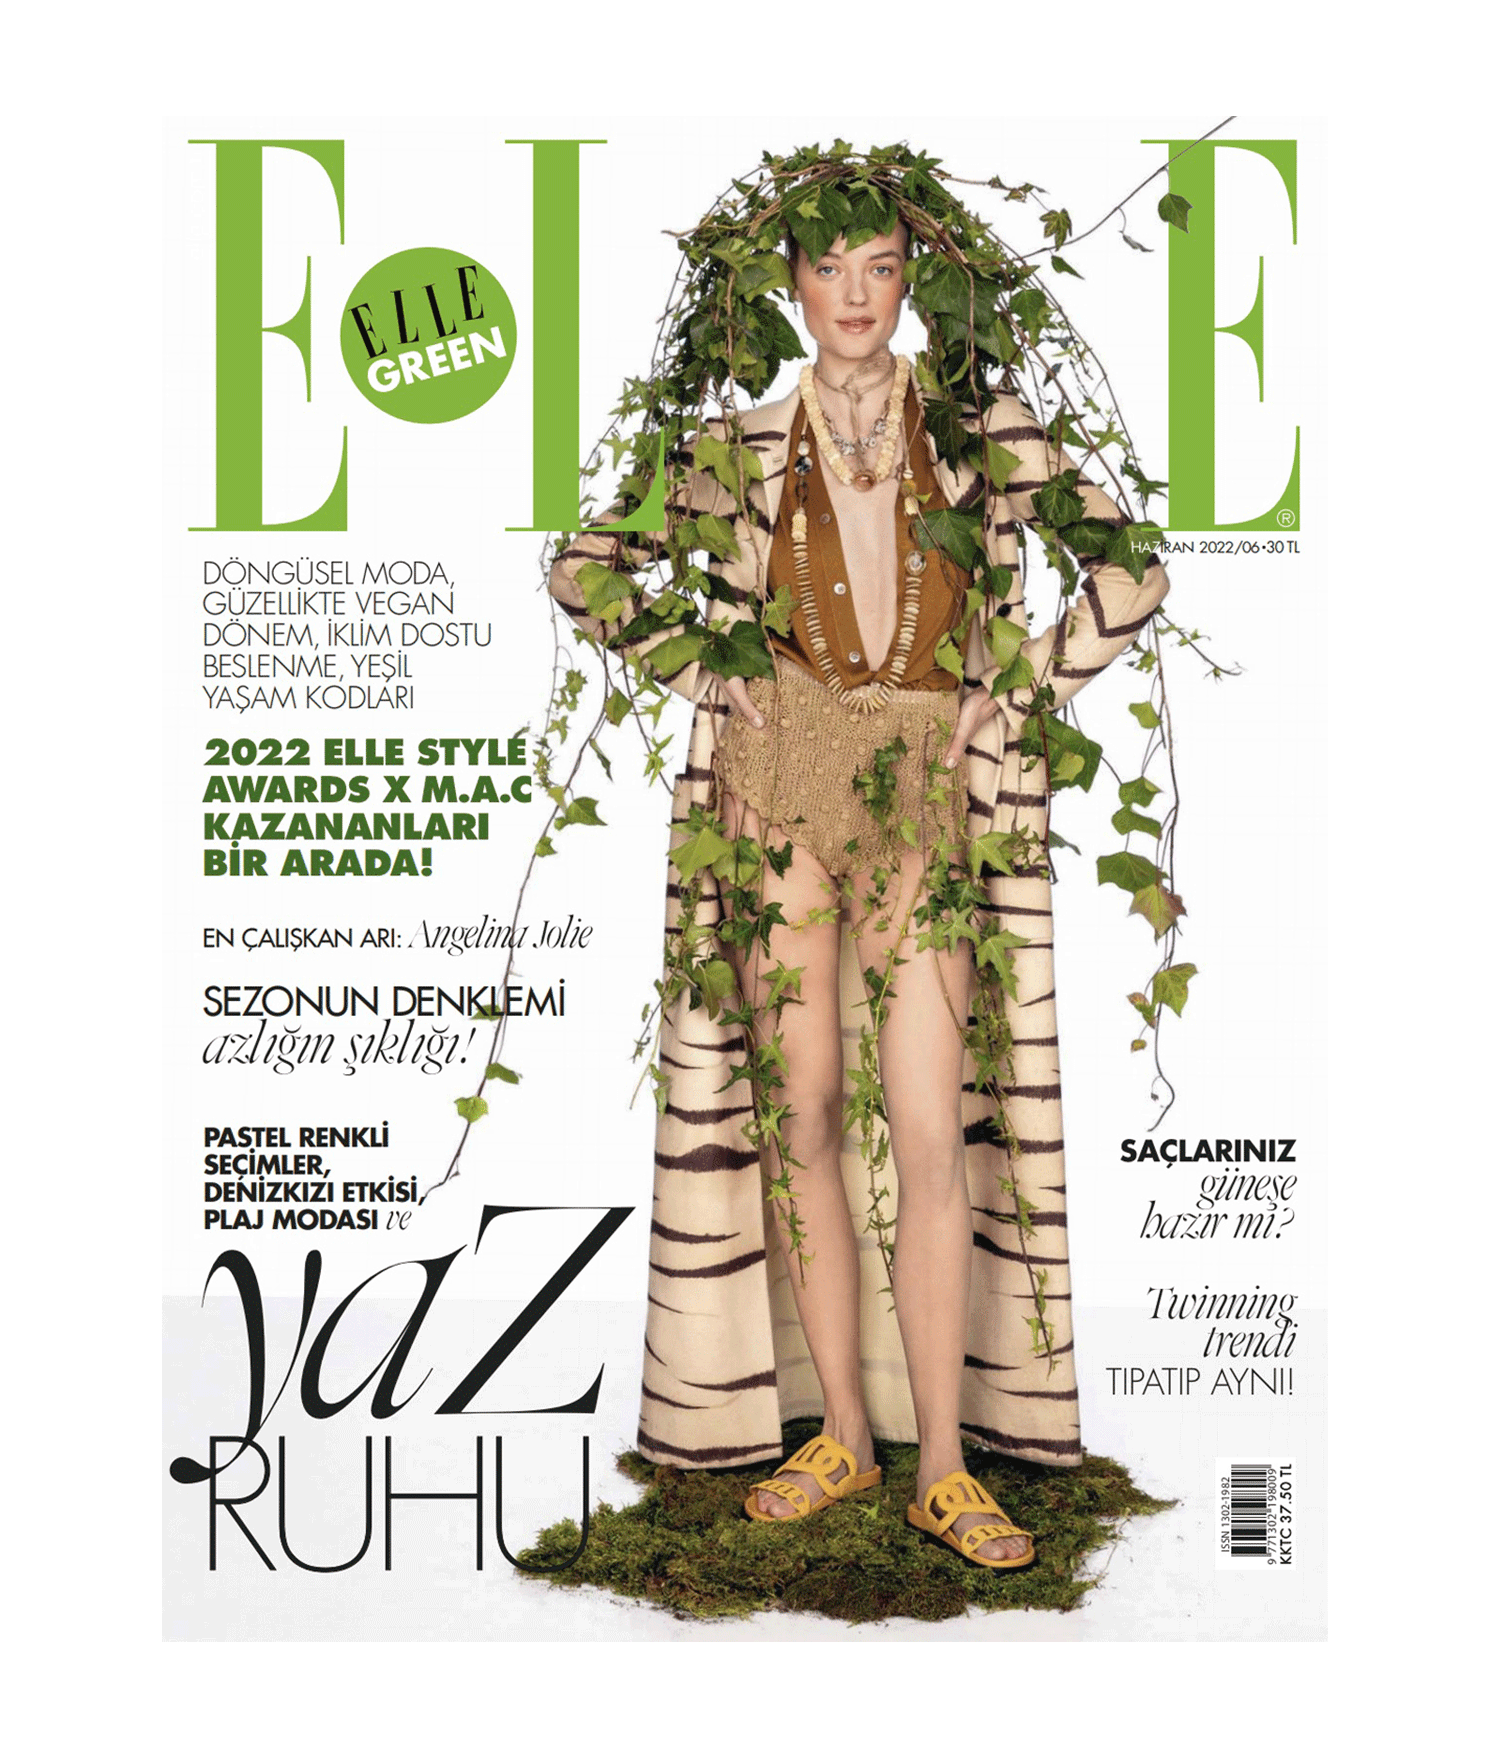 Elle magazine cover hi-res stock photography and images - Alamy